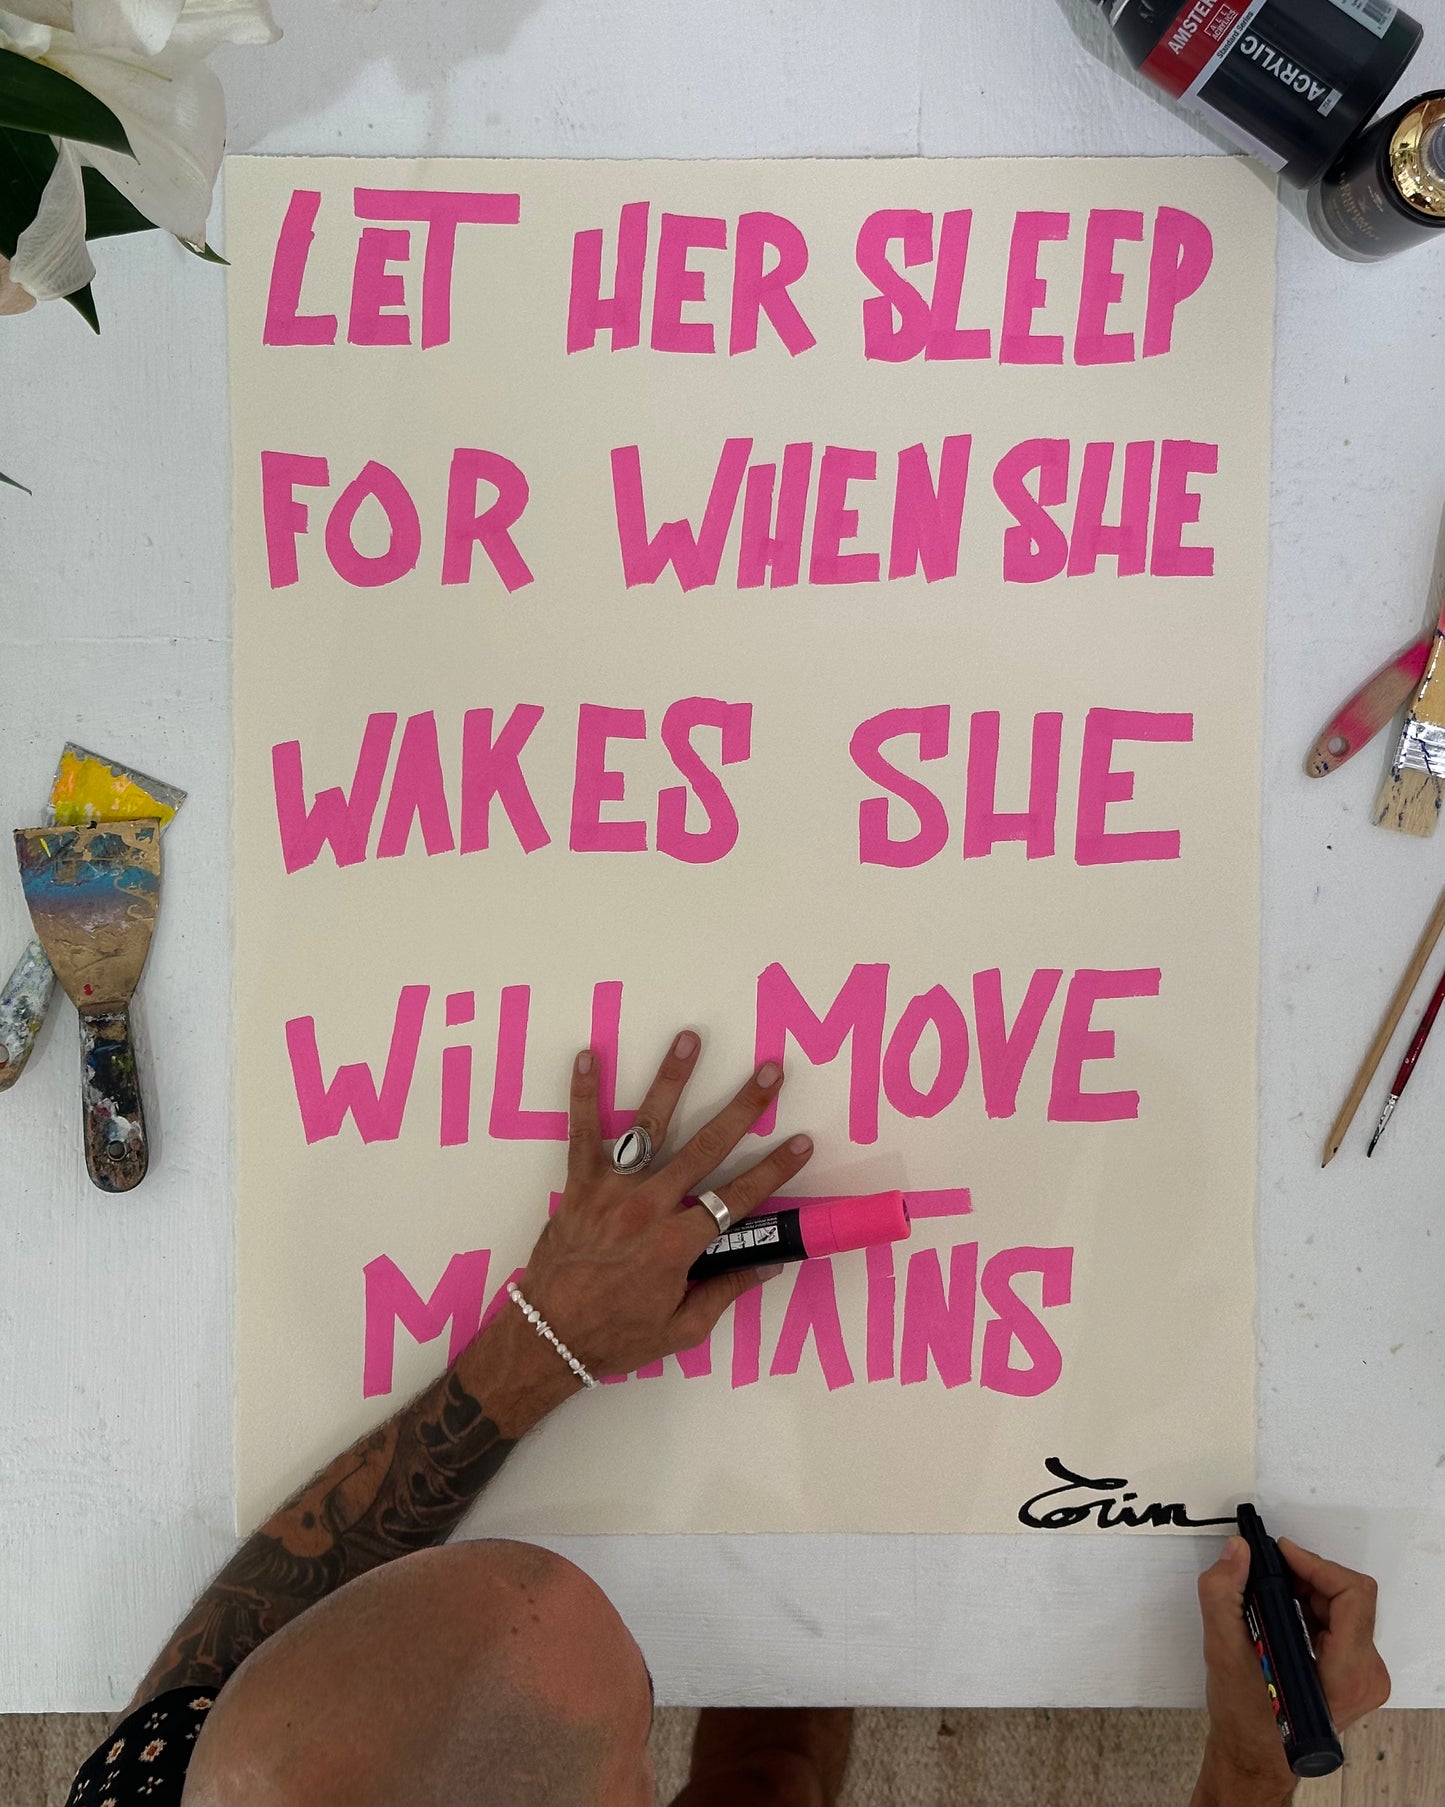 LET HER SLEEP FOR WHEN SHE WAKES...